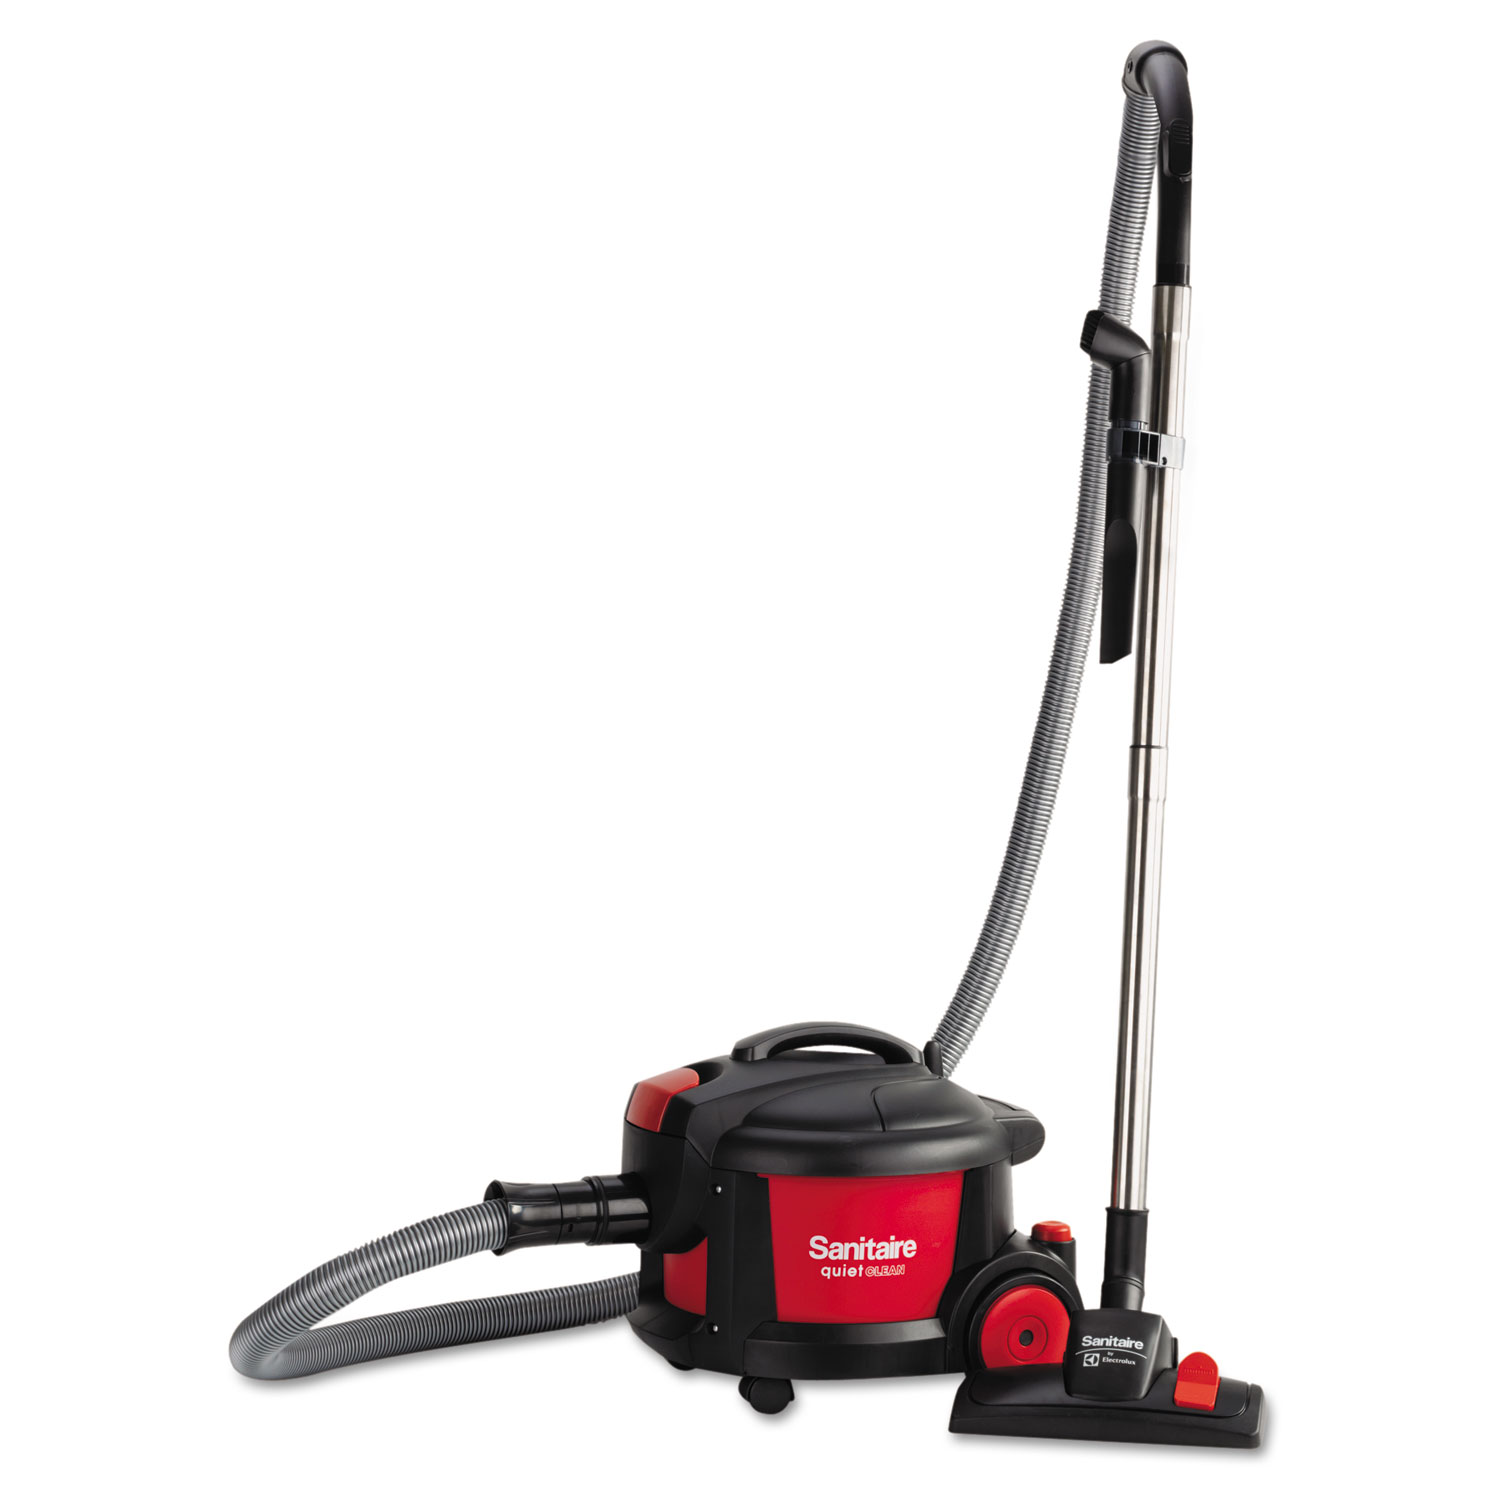 Electrolux Floor Care Extend Top-Hat Canister Vacuum, 9 Amp, 11" Cleaning Path, Red/Black - image 2 of 2